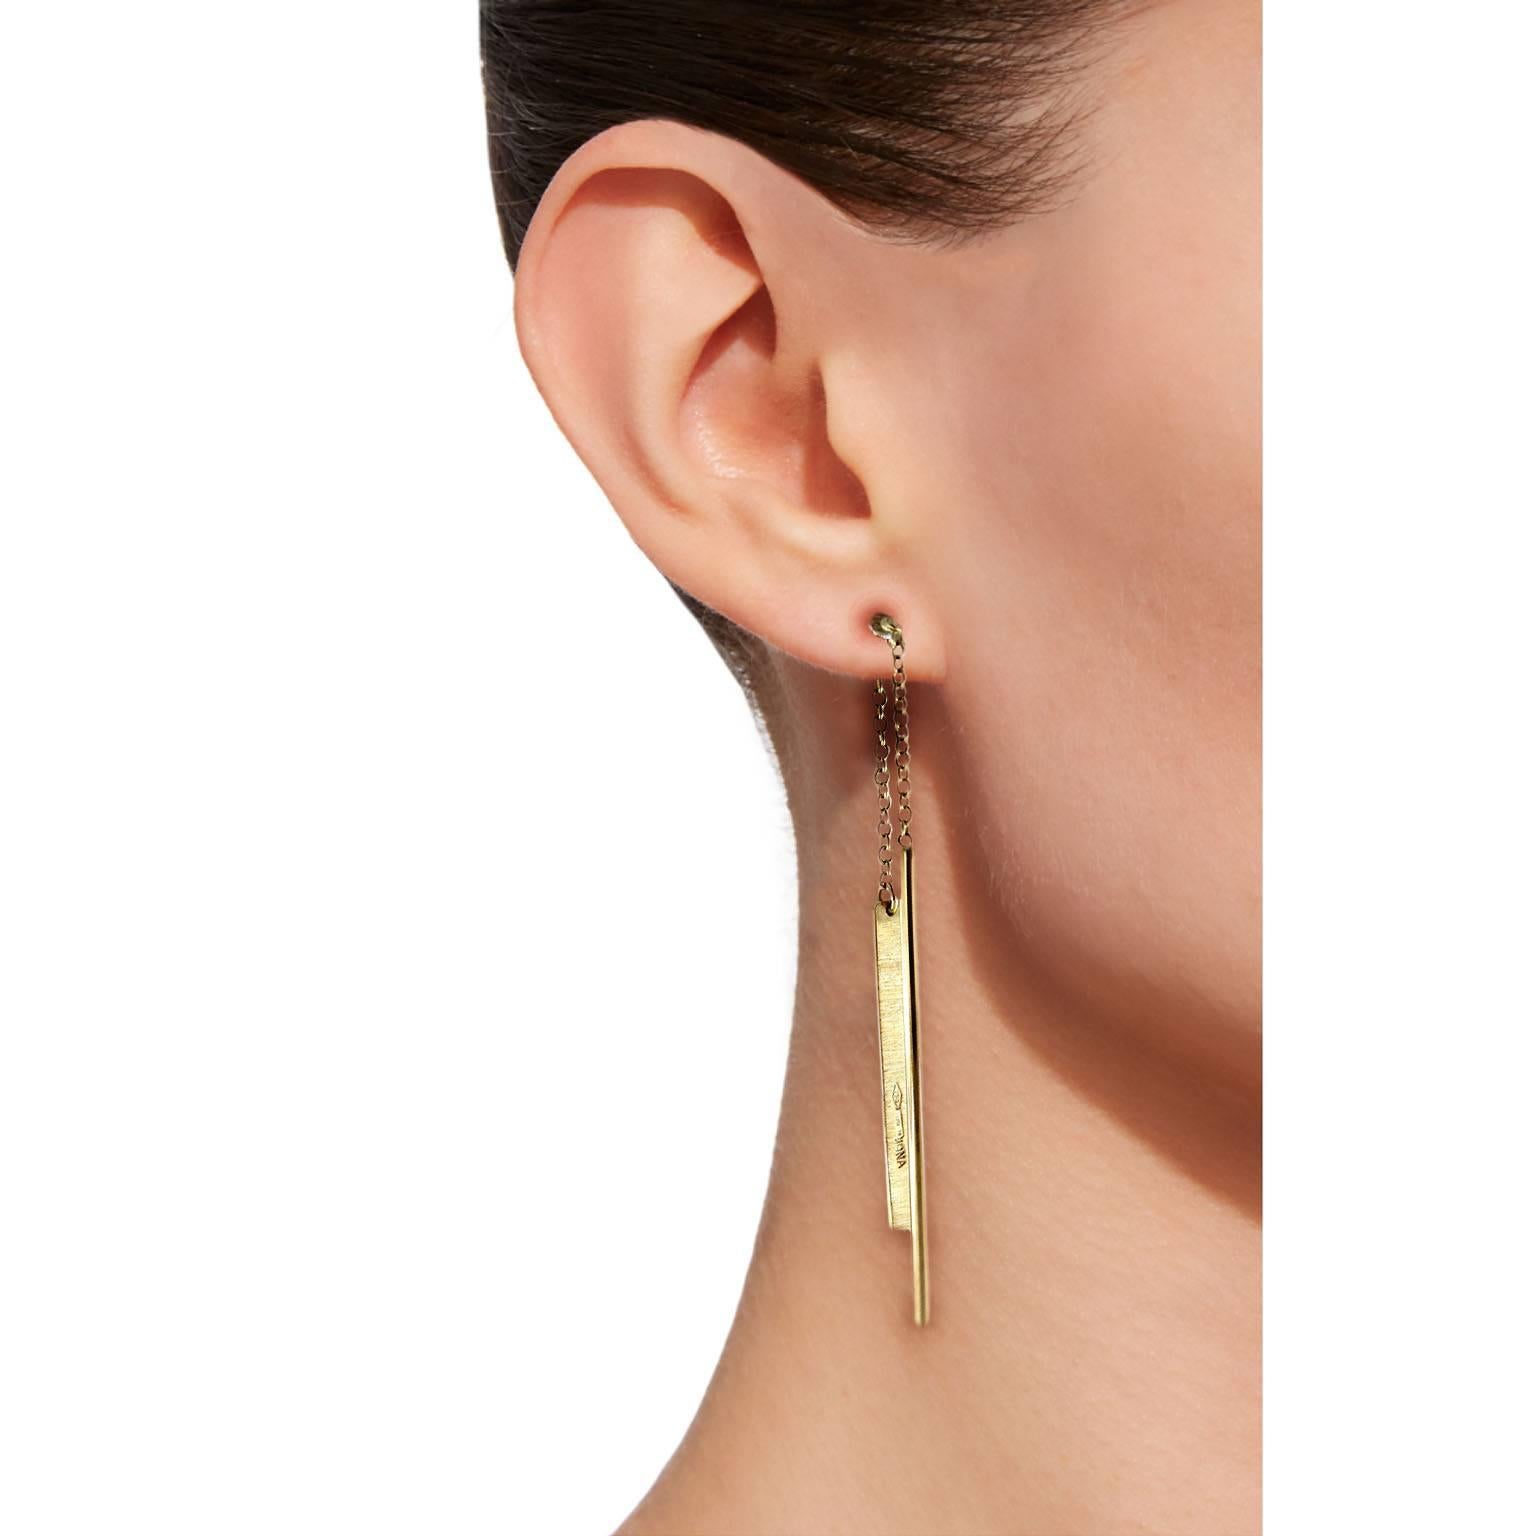 Jona design collection, hand crafted in Italy, 18 karat brushed and polished yellow gold dangling bar ear pendants. 

All Jona jewelry is new and has never been previously owned or worn. Each item will arrive at your door beautifully gift wrapped in